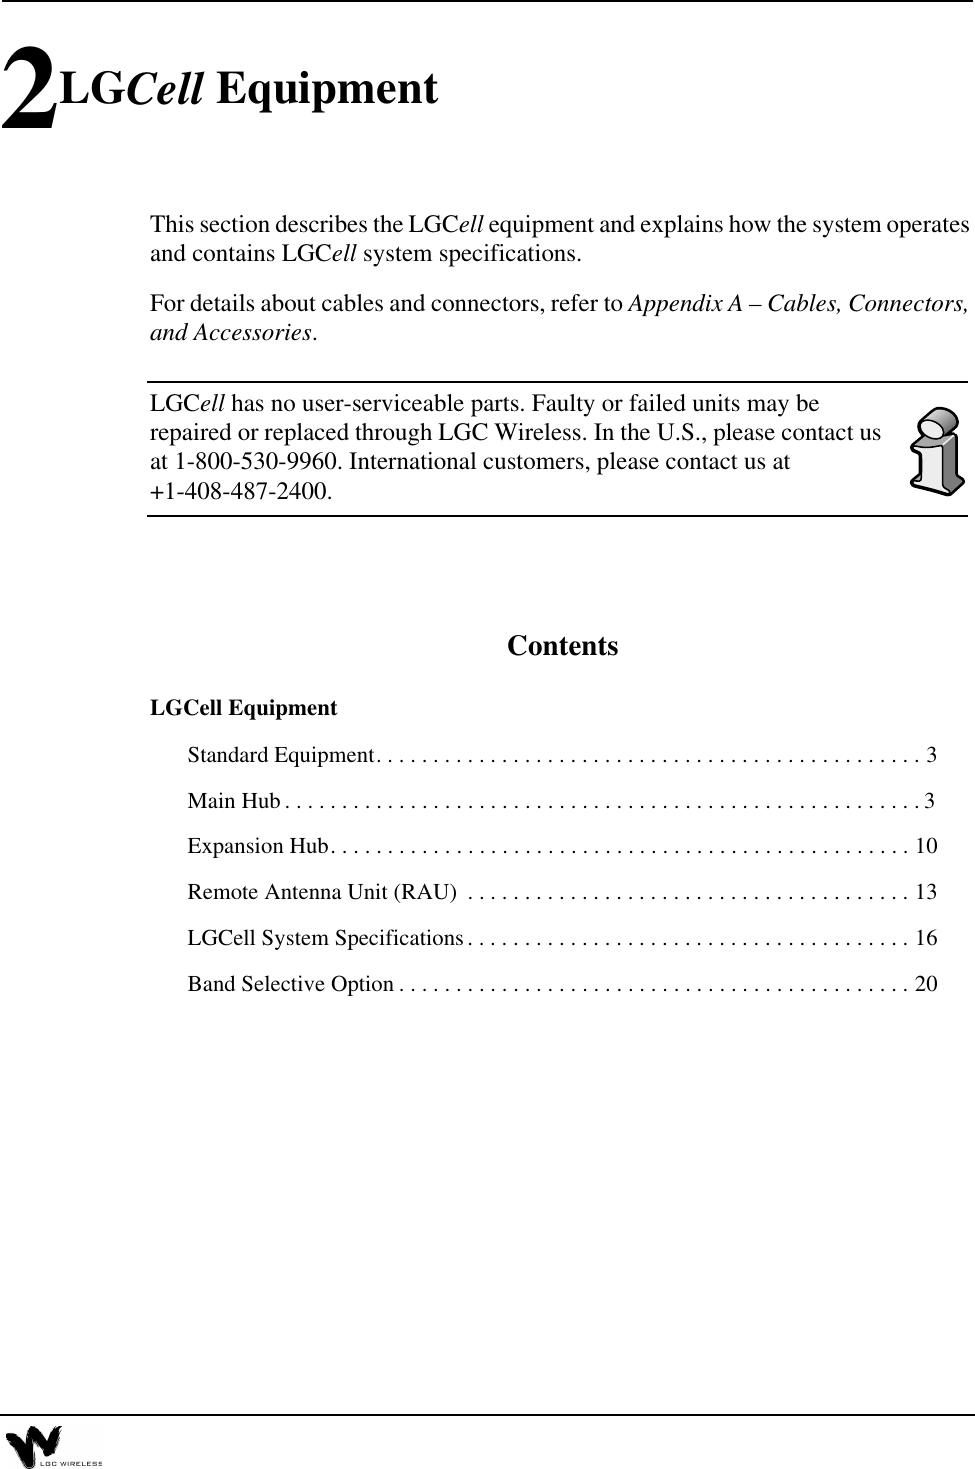 2LGCell EquipmentThis section describes the LGCell equipment and explains how the system operates and contains LGCell system specifications.For details about cables and connectors, refer to Appendix A – Cables, Connectors, and Accessories.LGCell has no user-serviceable parts. Faulty or failed units may be repaired or replaced through LGC Wireless. In the U.S., please contact us at 1-800-530-9960. International customers, please contact us at +1-408-487-2400.ContentsLGCell EquipmentStandard Equipment. . . . . . . . . . . . . . . . . . . . . . . . . . . . . . . . . . . . . . . . . . . . . . . . 3Main Hub . . . . . . . . . . . . . . . . . . . . . . . . . . . . . . . . . . . . . . . . . . . . . . . . . . . . . . . . 3Expansion Hub. . . . . . . . . . . . . . . . . . . . . . . . . . . . . . . . . . . . . . . . . . . . . . . . . . . 10Remote Antenna Unit (RAU)  . . . . . . . . . . . . . . . . . . . . . . . . . . . . . . . . . . . . . . . 13LGCell System Specifications. . . . . . . . . . . . . . . . . . . . . . . . . . . . . . . . . . . . . . . 16Band Selective Option . . . . . . . . . . . . . . . . . . . . . . . . . . . . . . . . . . . . . . . . . . . . . 20